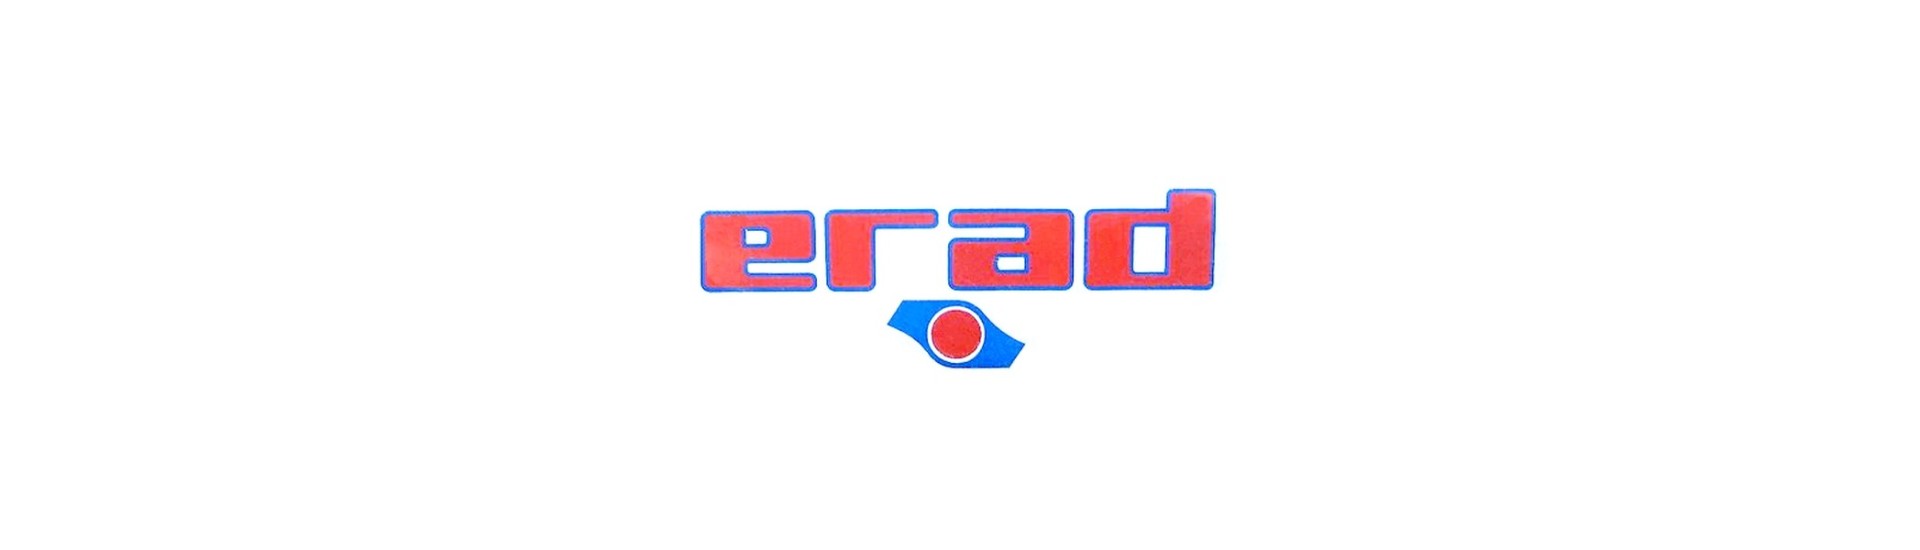 Cardan at the best price for car without a permit Erad